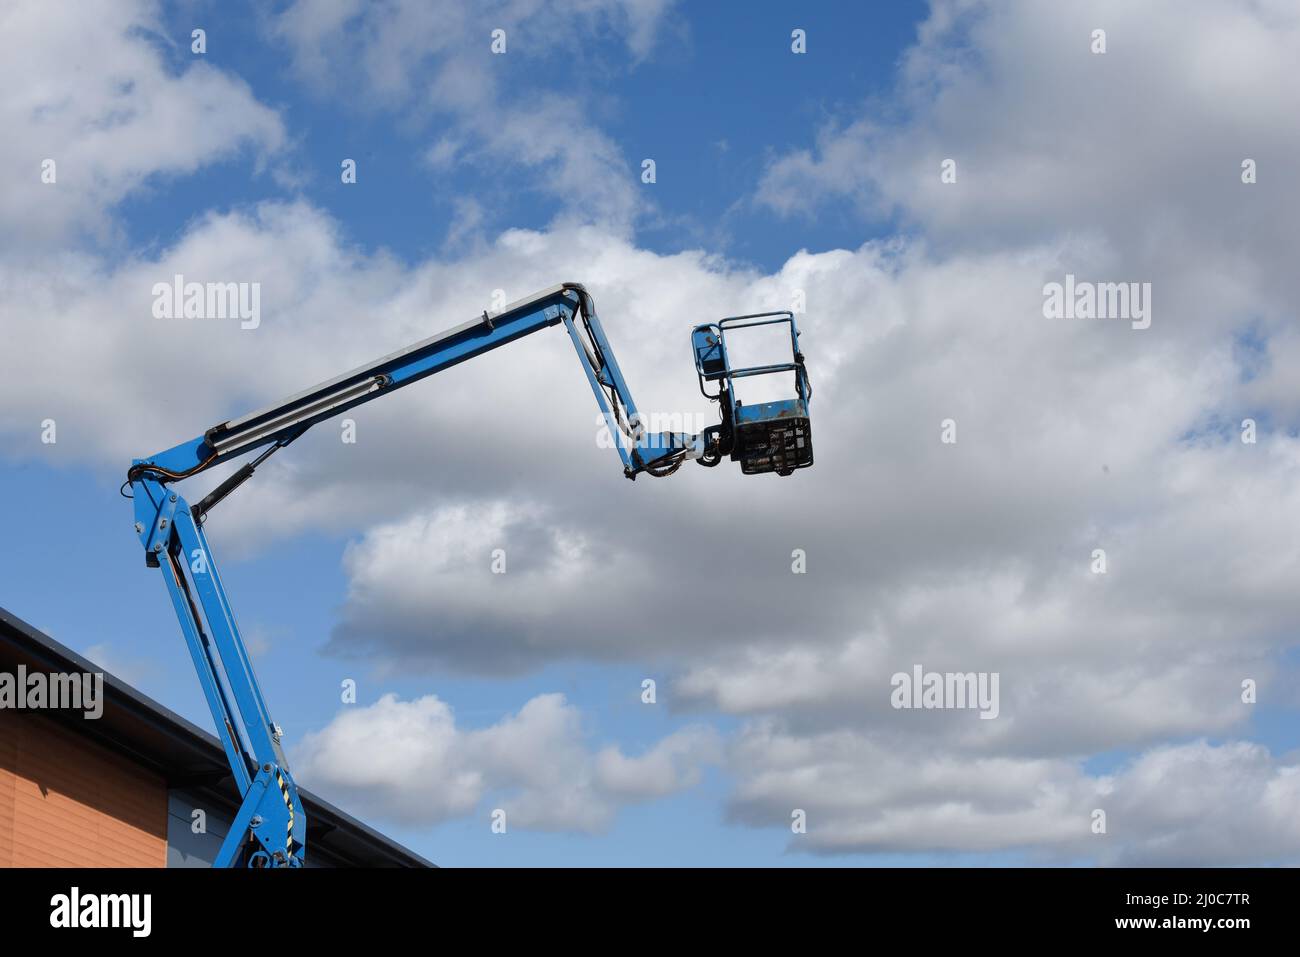 Cherry picker lift platform with telescopic arm on a building site to reach high up in construction industry Stock Photo